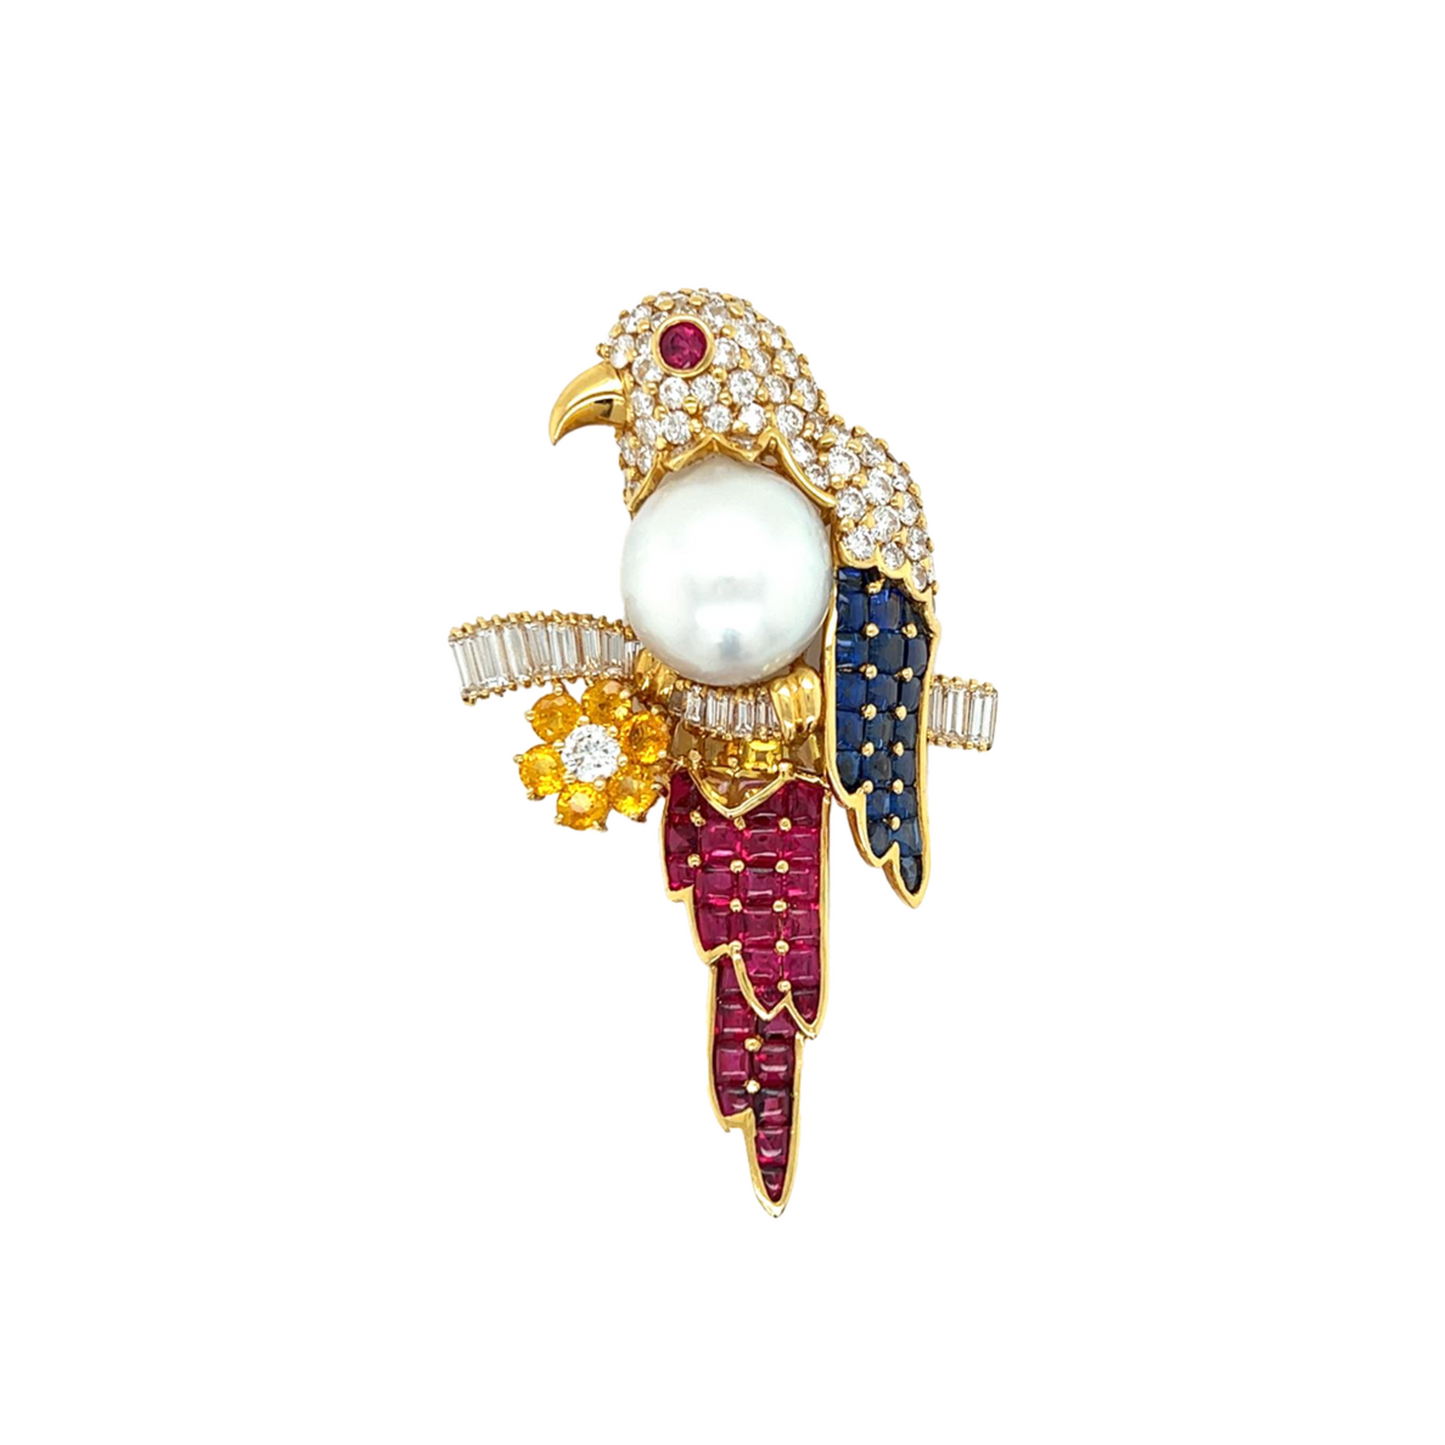 Post-1980s 18KT Yellow Gold Diamond, Cultured Pearl, Ruby & Sapphire Bird Brooch front